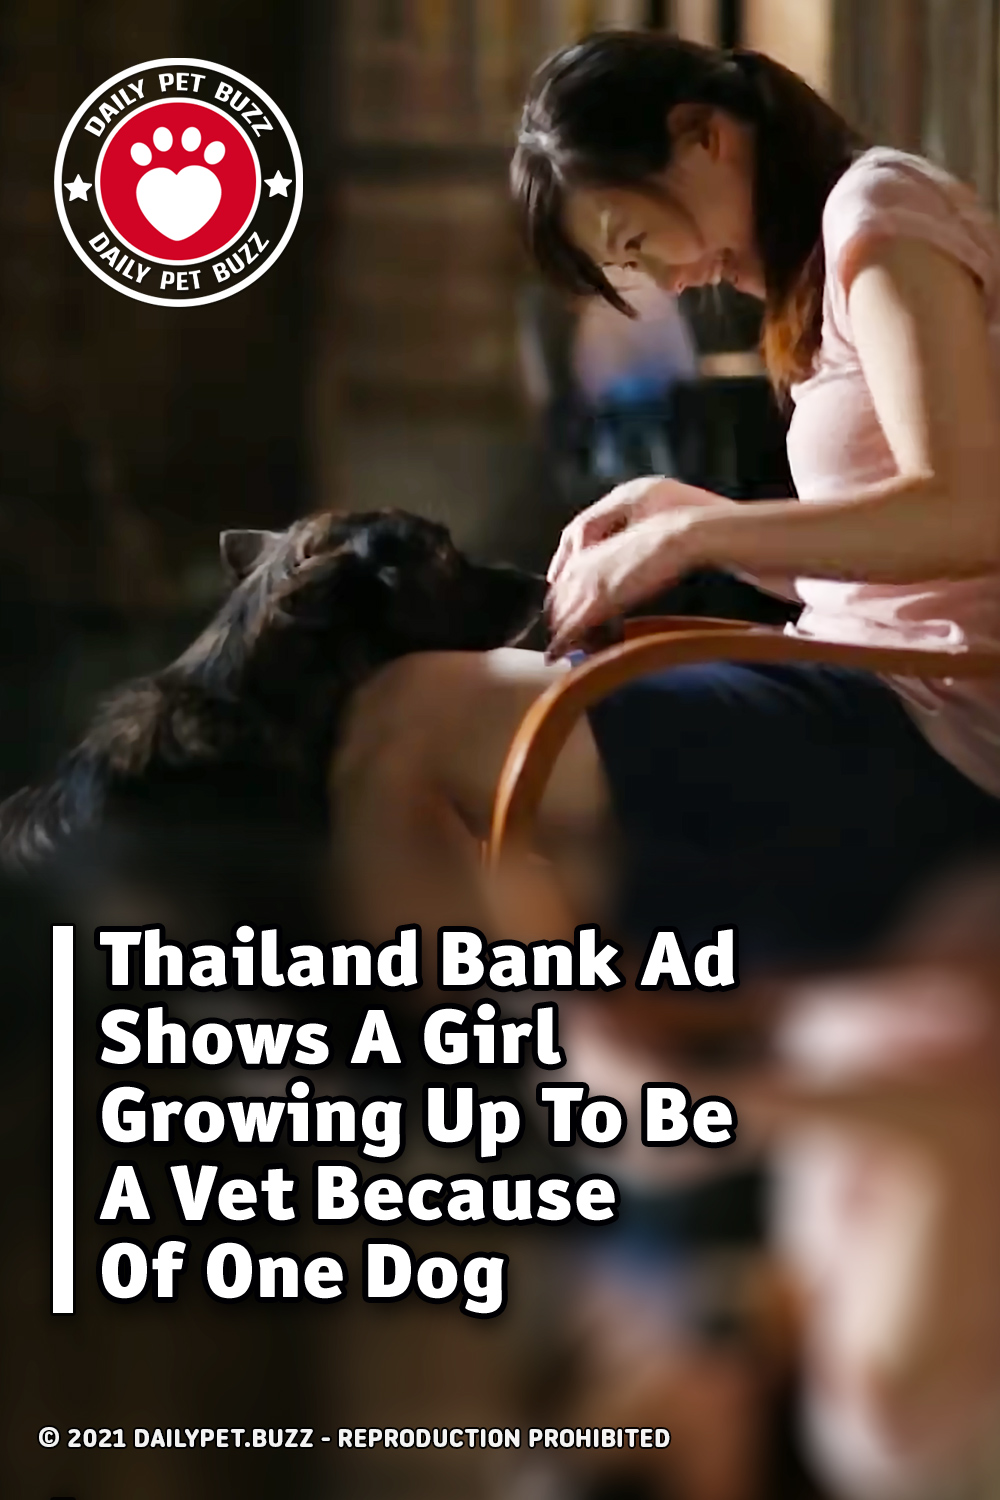 Thailand Bank Ad Shows A Girl Growing Up To Be A Vet Because Of One Dog